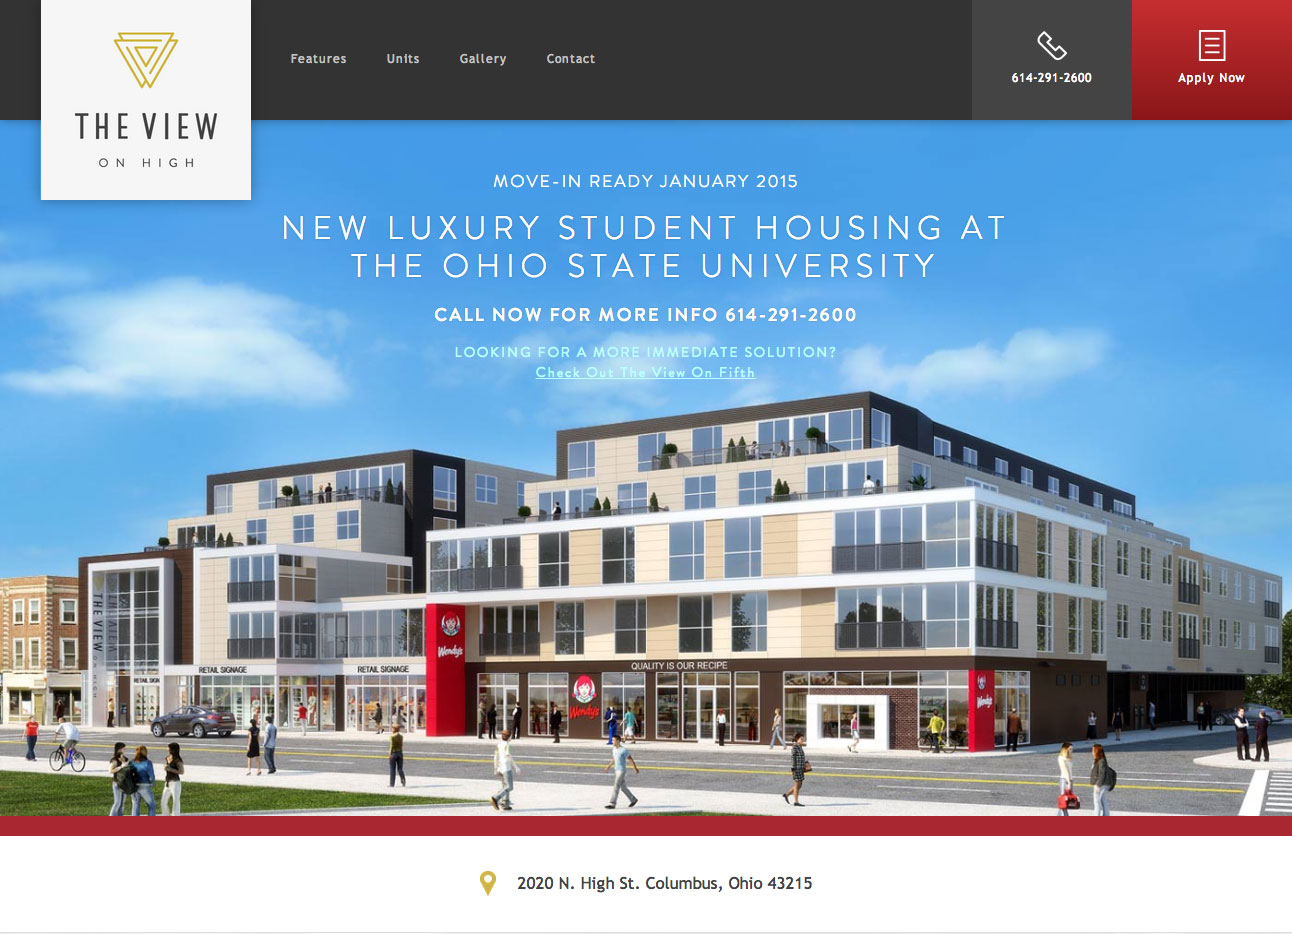 Homepage of the website, showcasing a 3d rendering of the appartments.